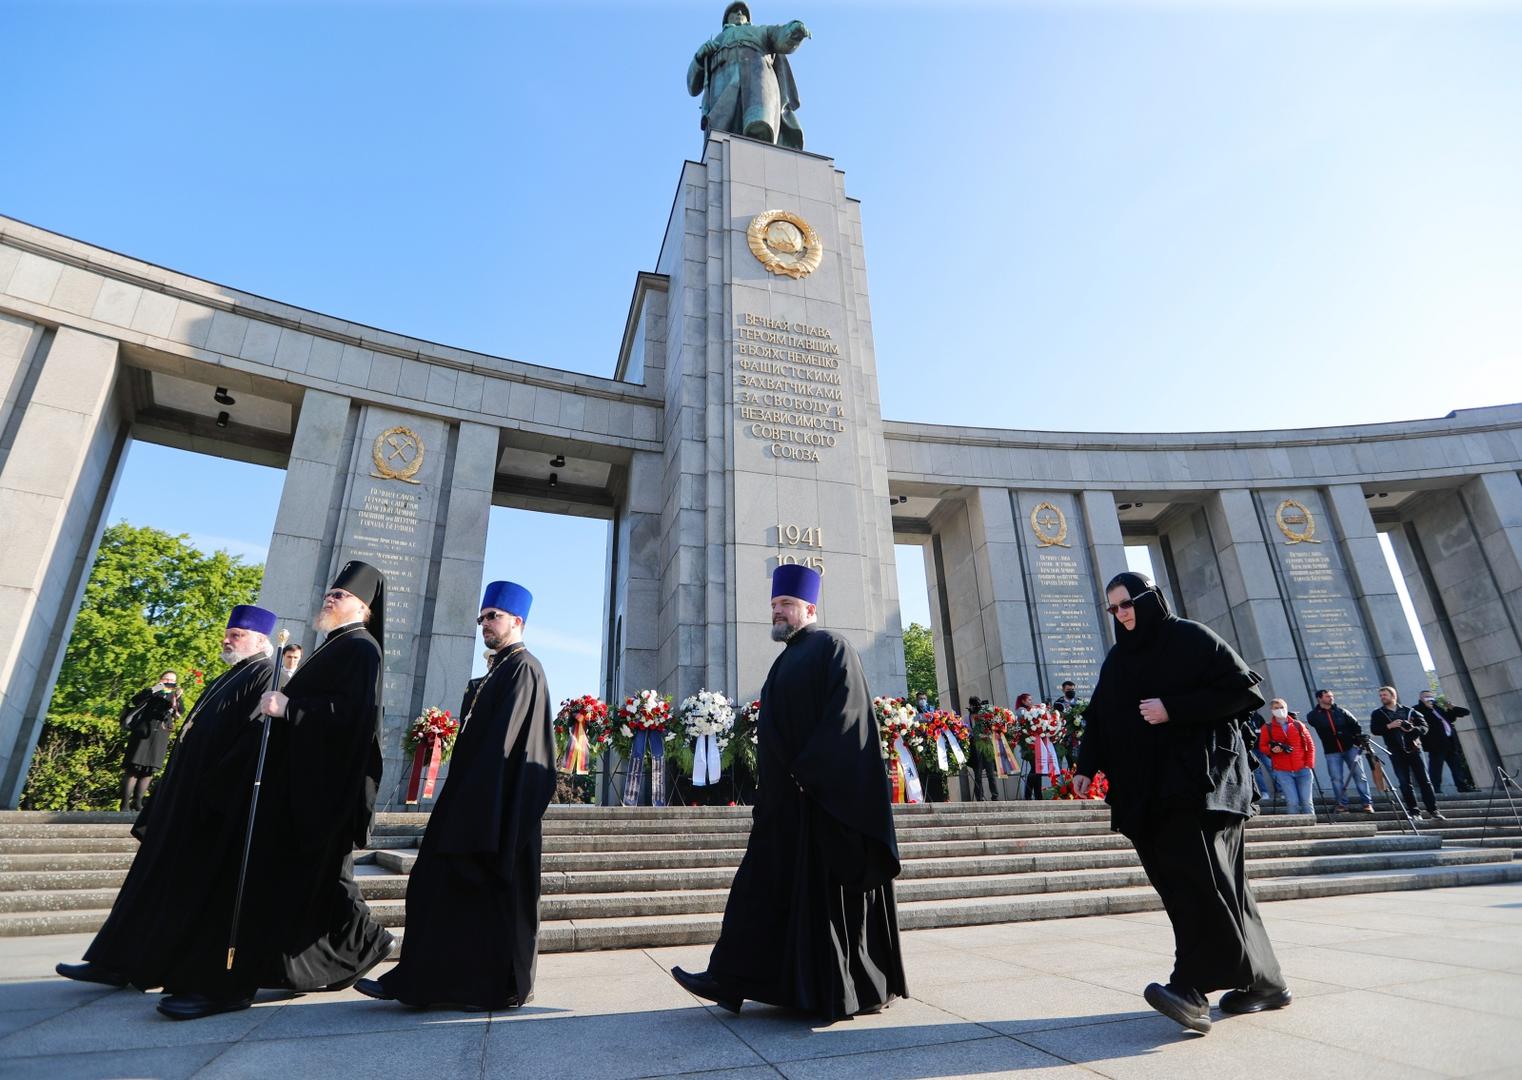 Events commemorating the end of World War Two in Berlin Russian Orthodox clergy take part in celebrations to mark Victory Day and the 75th anniversary of the end of World War Two at the Soviet War Memorial at Tiergarten Park in Berlin, Germany, May 8, 2020. REUTERS/Fabrizio Bensch FABRIZIO BENSCH